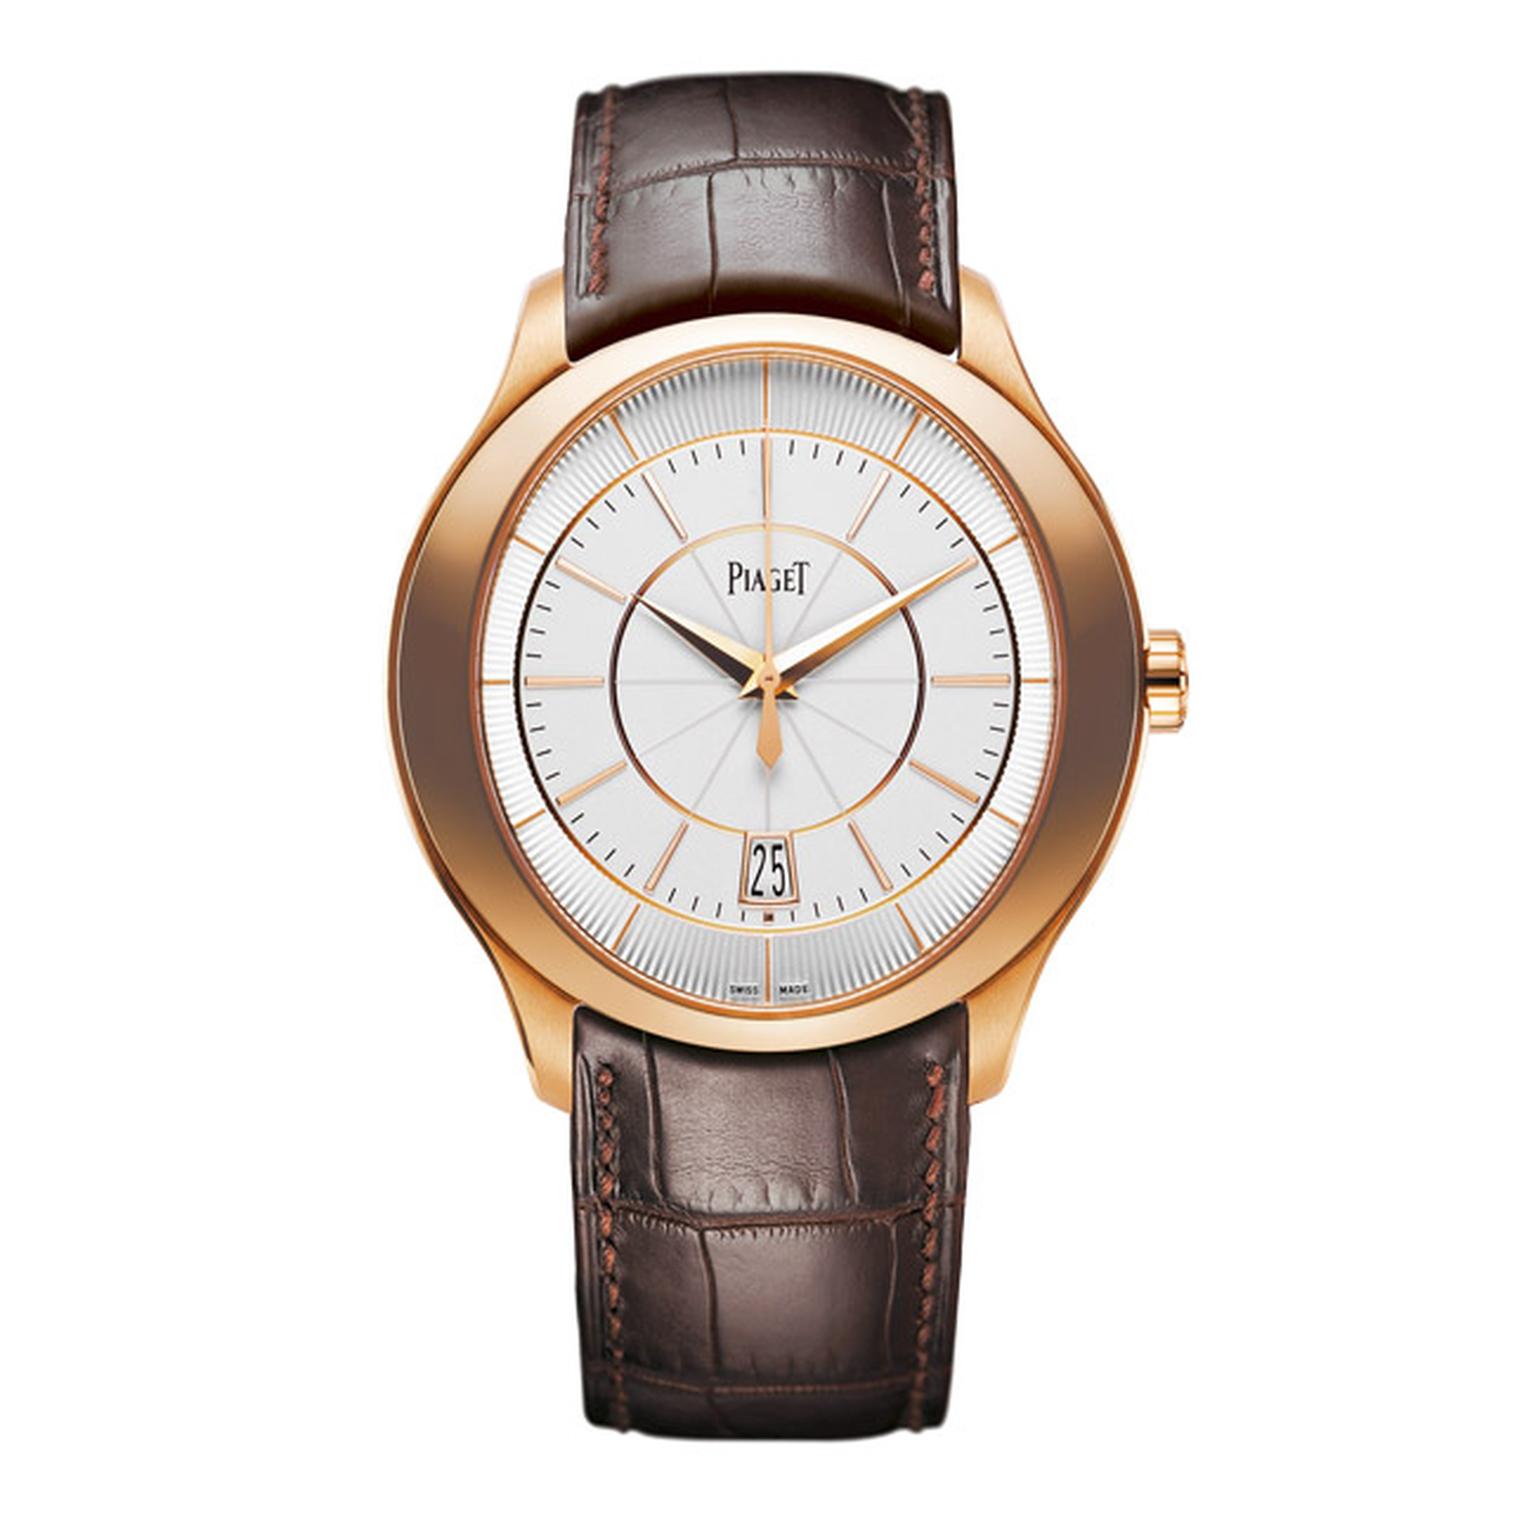 Piaget-Governeur-Watch-Main